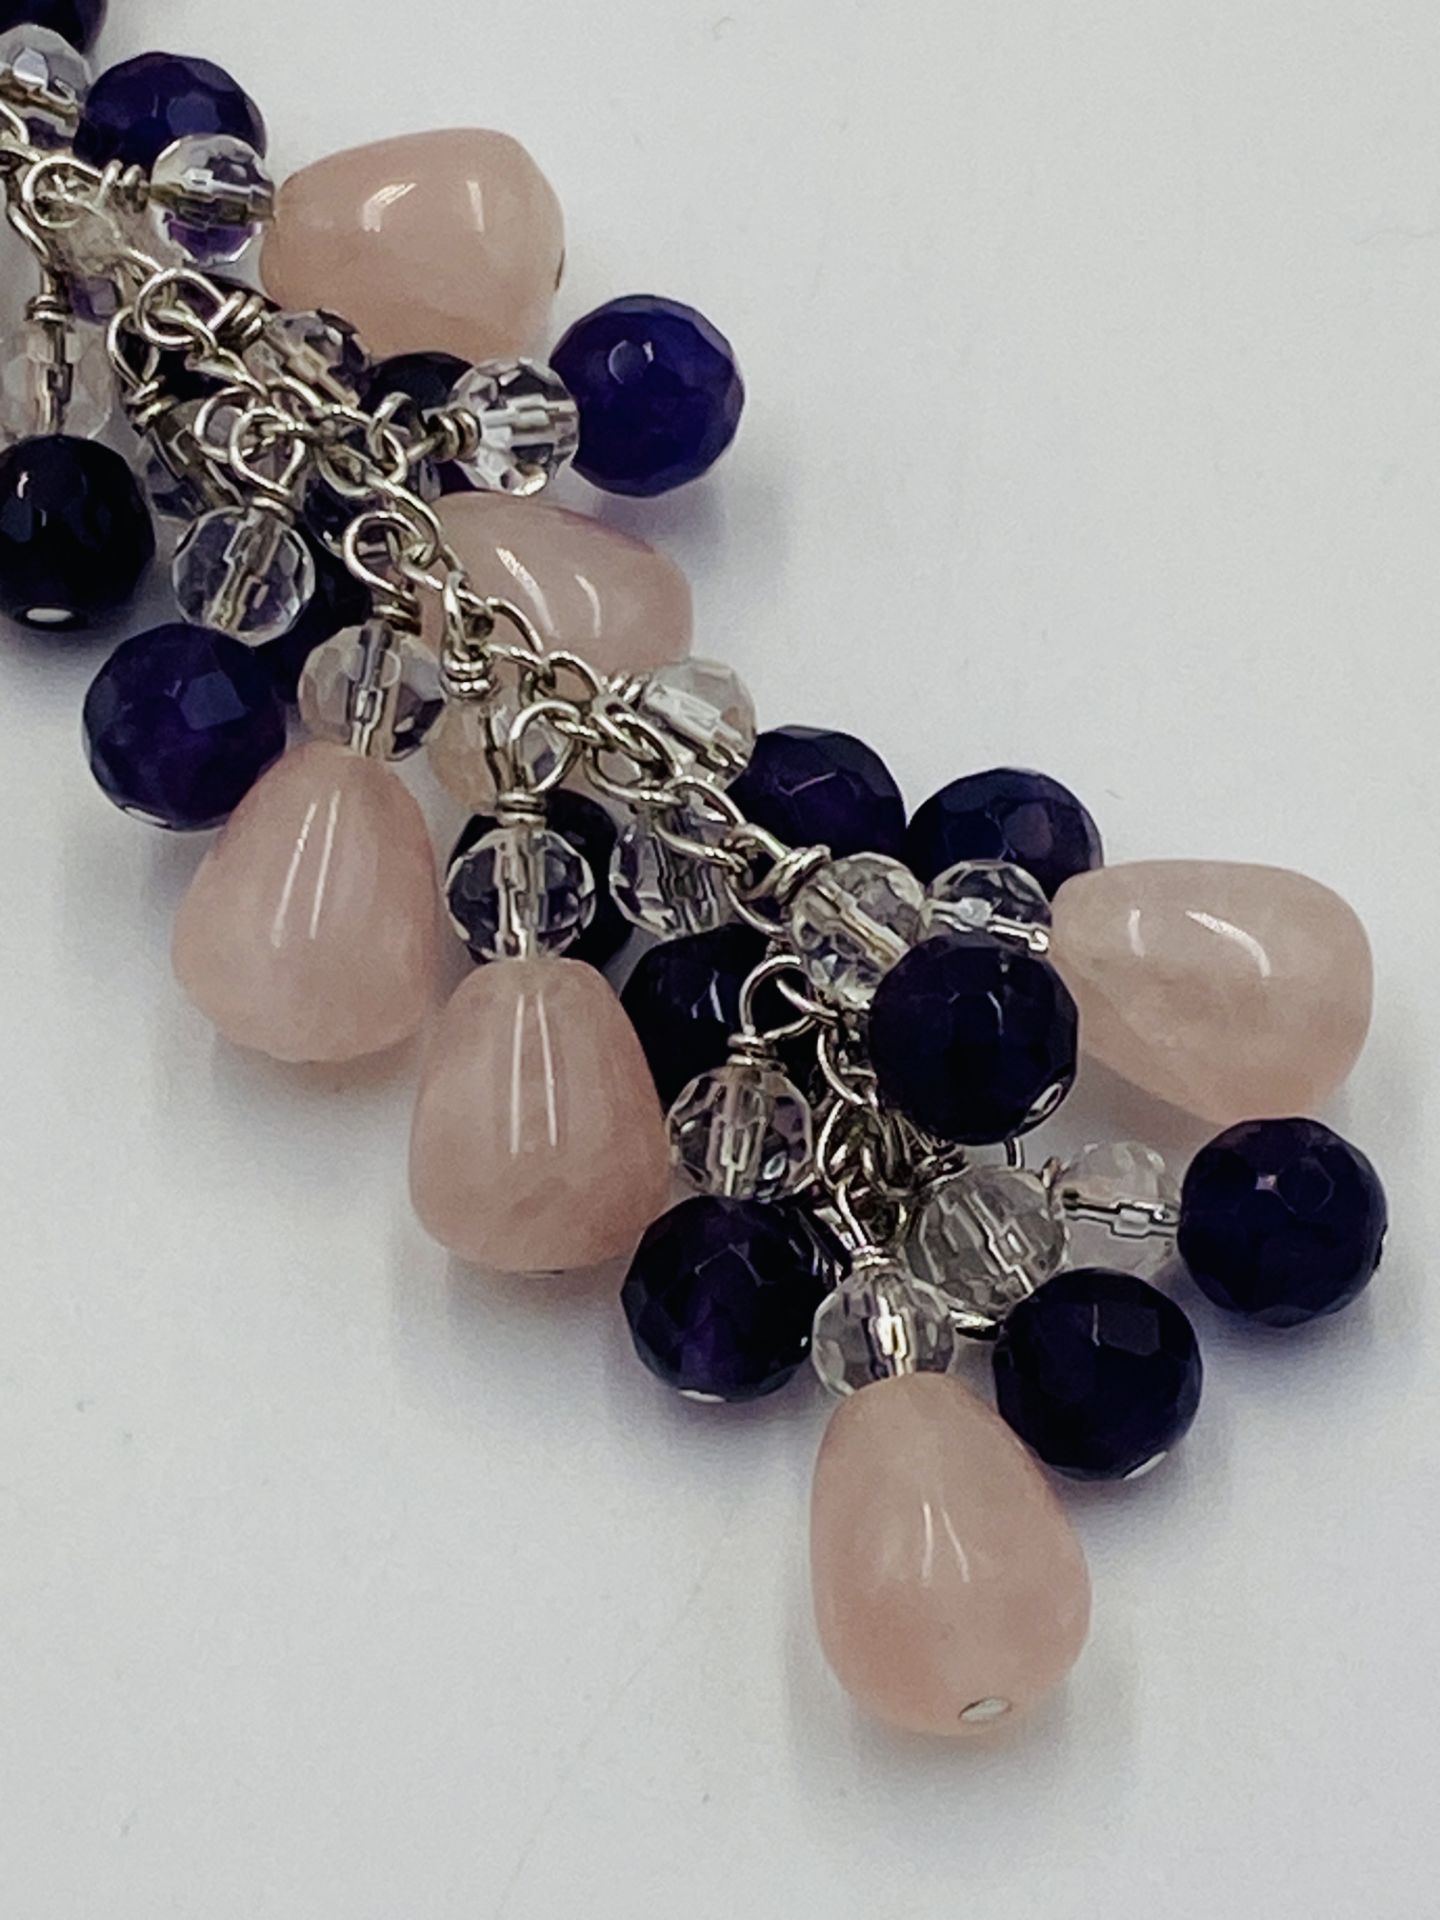 Silver bracelet with amethyst and rose quartz - Image 3 of 4